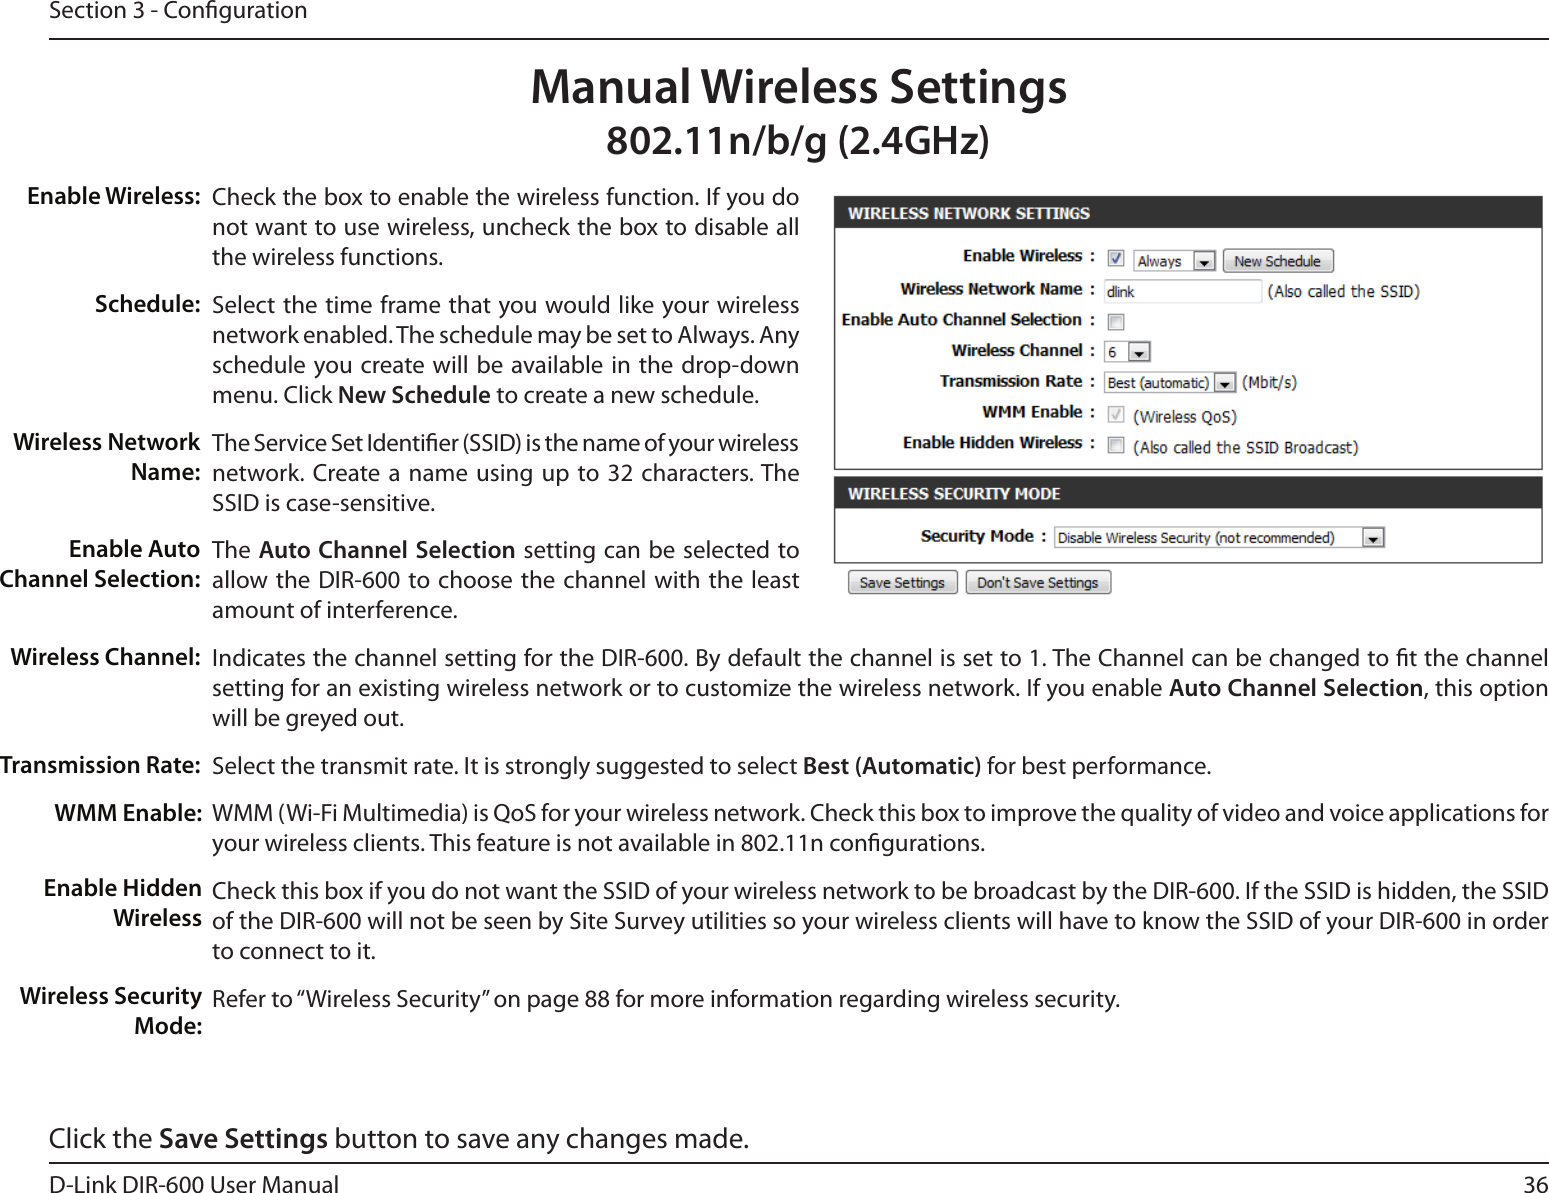 36D-Link DIR-600 User ManualSection 3 - CongurationCheck the box to enable the wireless function. If you do not want to use wireless, uncheck the box to disable all the wireless functions.Select the time frame that you would like your wireless network enabled. The schedule may be set to Always. Any schedule you create will be available in the  drop-down menu. Click New Schedule to create a new schedule.The Service Set Identier (SSID) is the name of your wireless network. Create a  name  using  up  to 32  characters. The SSID is case-sensitive.The Auto Channel Selection setting can be selected to allow the DIR-600 to choose the channel with the least amount of interference.Indicates the channel setting for the DIR-600. By default the channel is set to 1. The Channel can be changed to t the channel setting for an existing wireless network or to customize the wireless network. If you enable Auto Channel Selection, this option will be greyed out.Select the transmit rate. It is strongly suggested to select Best (Automatic) for best performance.WMM (Wi-Fi Multimedia) is QoS for your wireless network. Check this box to improve the quality of video and voice applications foryour wireless clients. This feature is not available in 802.11n congurations.Check this box if you do not want the SSID of your wireless network to be broadcast by the DIR-600. If the SSID is hidden, the SSID of the DIR-600 will not be seen by Site Survey utilities so your wireless clients will have to know the SSID of your DIR-600 in order to connect to it.Refer to “Wireless Security” on page 88 for more information regarding wireless security.Enable Wireless:Schedule:Wireless Network Name:Enable Auto Channel Selection:Wireless Channel:Transmission Rate:Manual Wireless Settings802.11n/b/g (2.4GHz)WMM Enable:Enable Hidden WirelessWireless Security Mode:Click the Save Settings button to save any changes made.